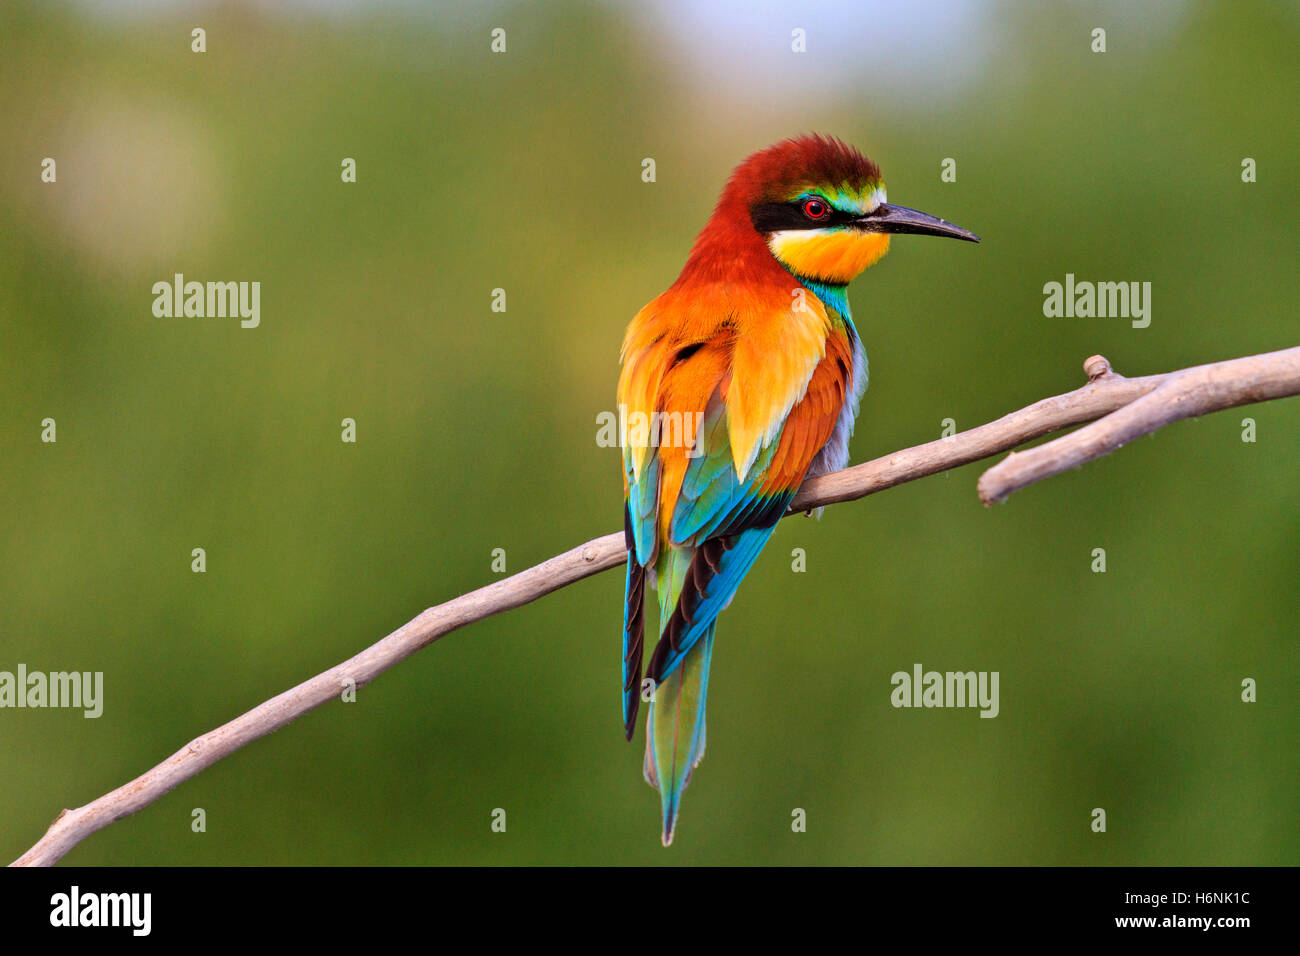 colored bird on green background Stock Photo